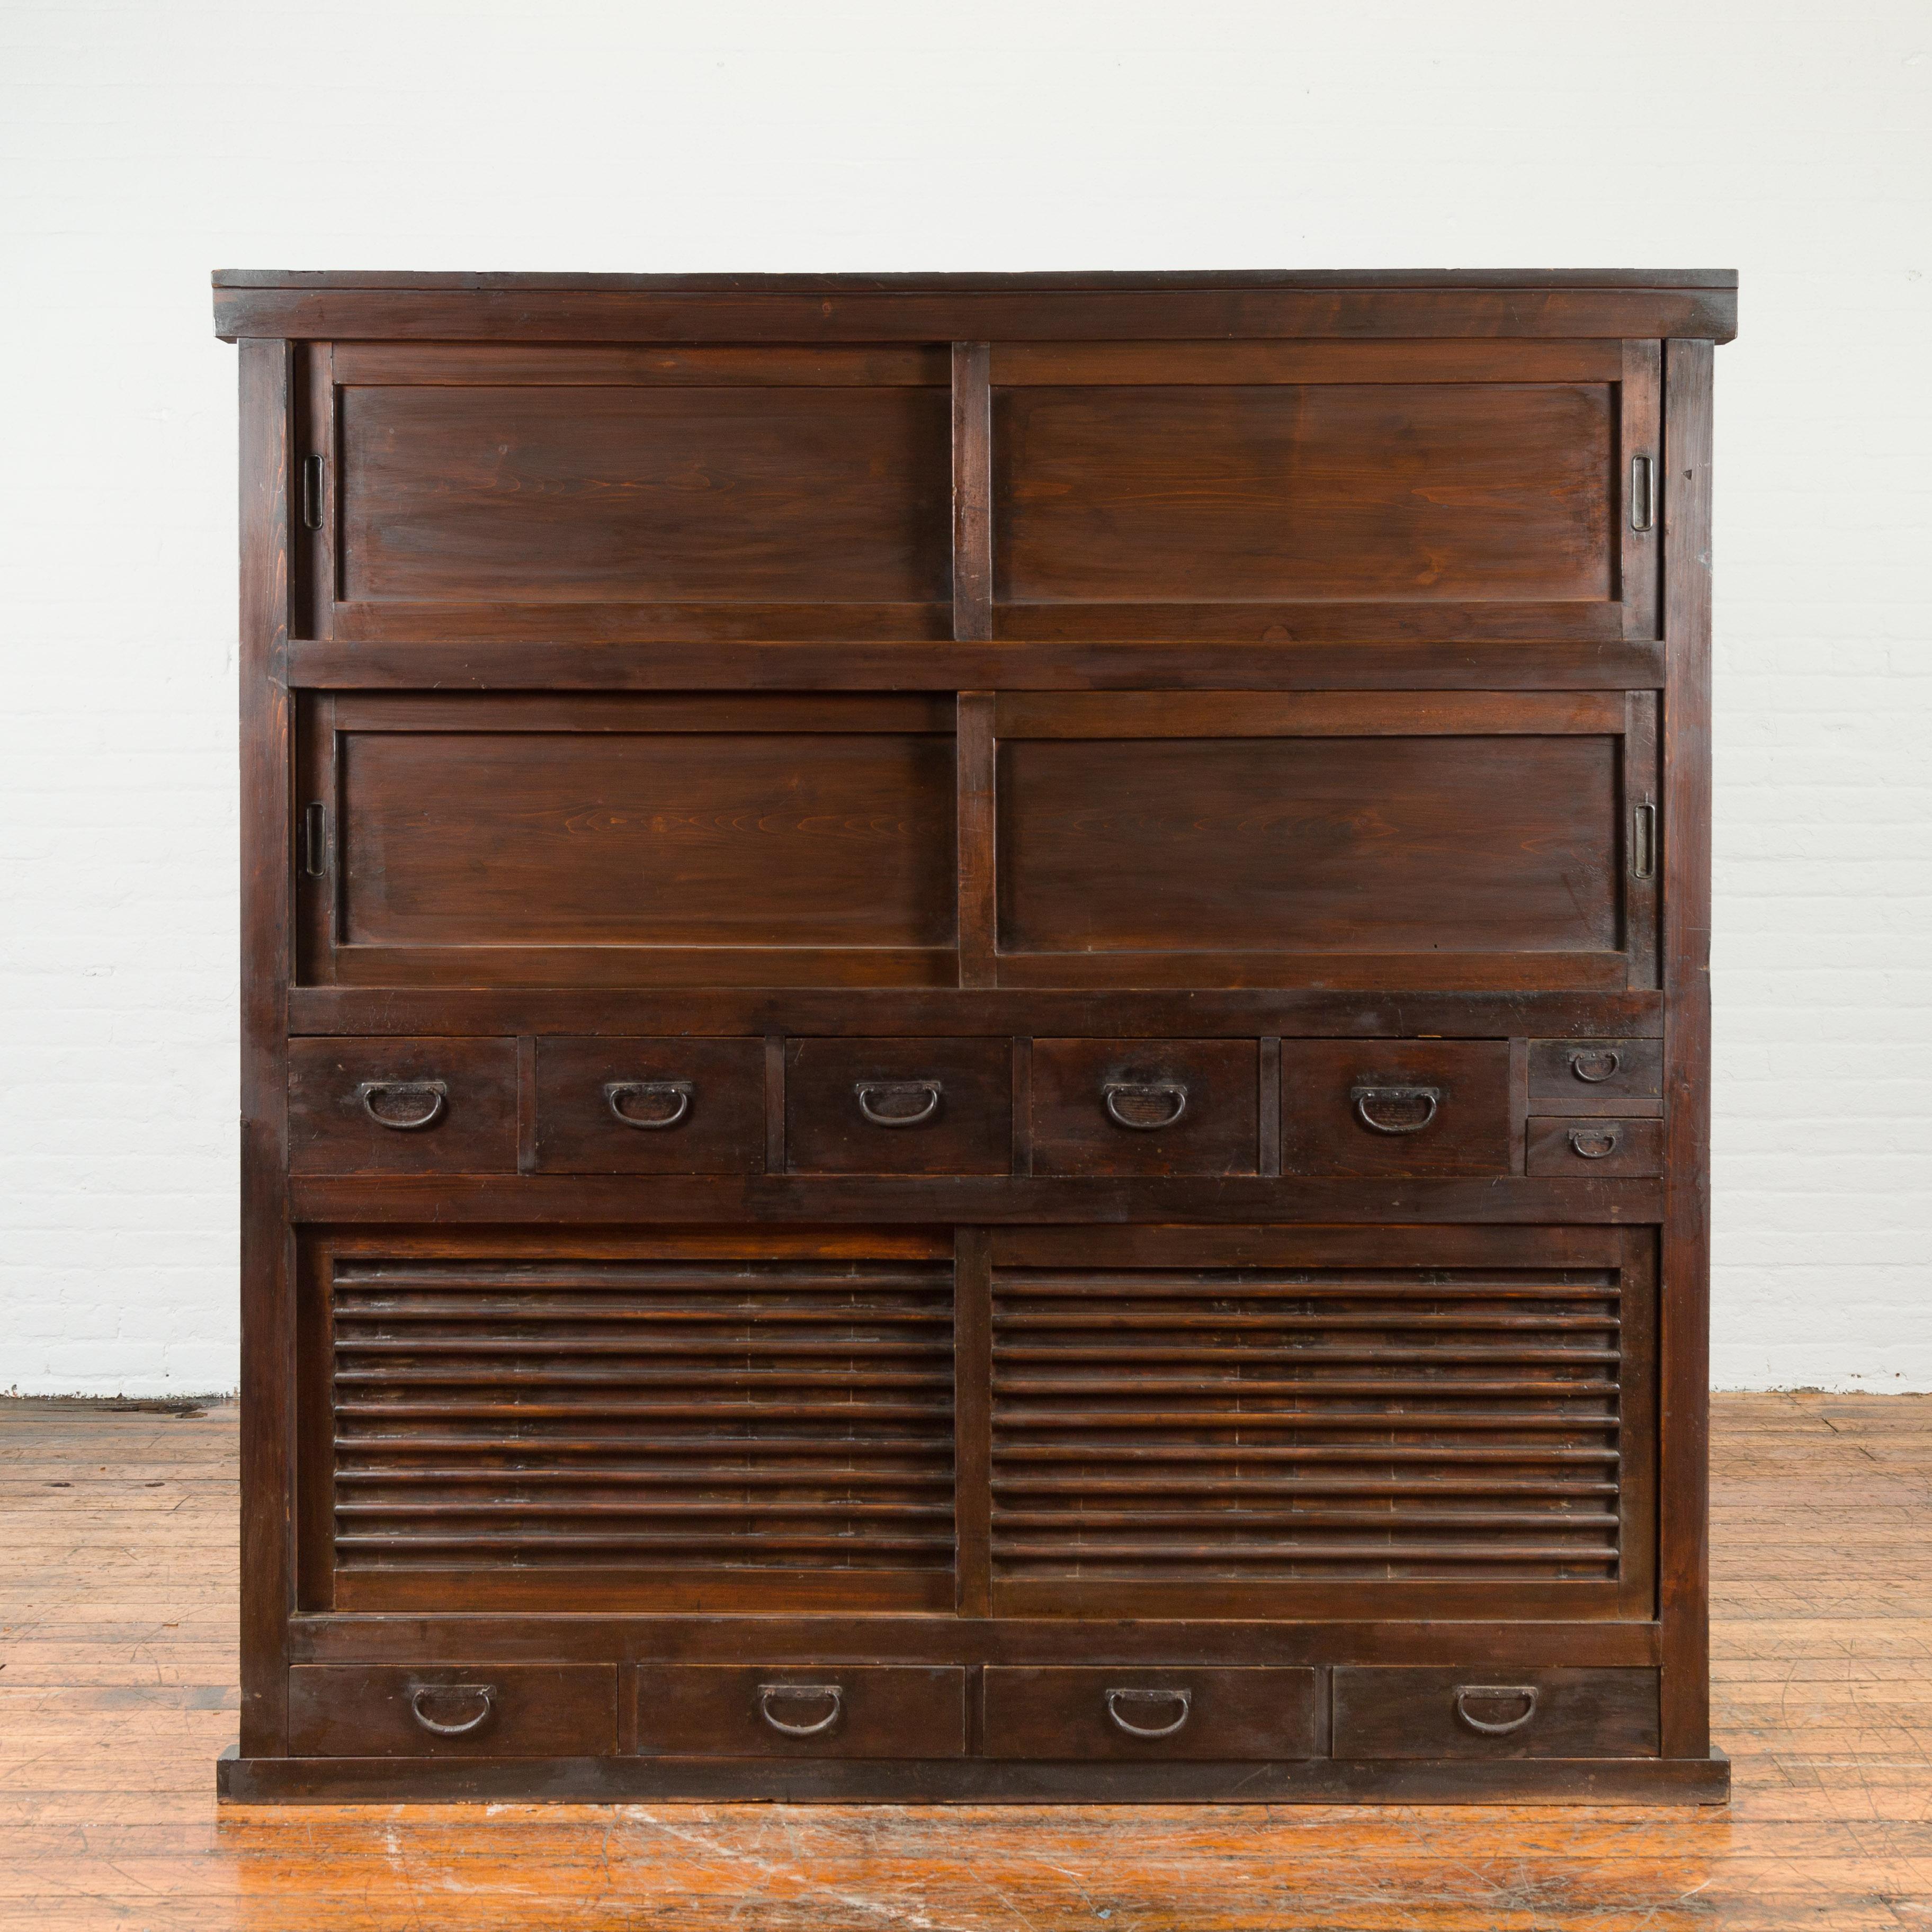 A Japanese Taisho period large single section wardrobe cabinet from the early 20th century, with three sets of sliding doors and iron hardware. Created in Japan during the Taisho period, this large cabinet features a perfectly organized façade made